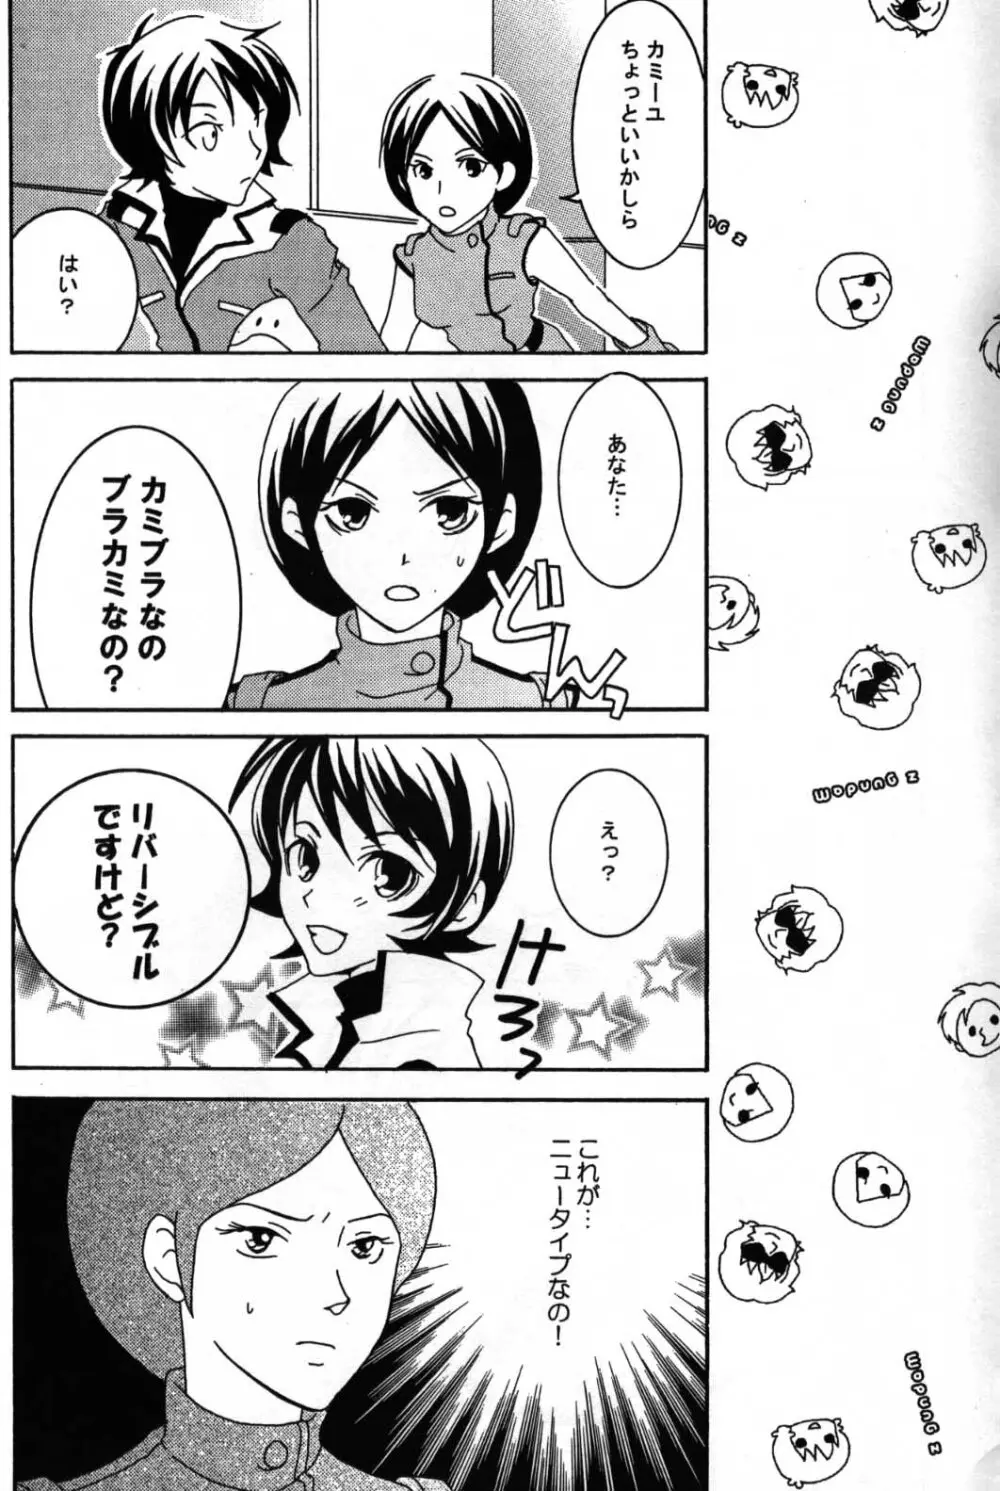 REPLAY 108 再録本 - page23